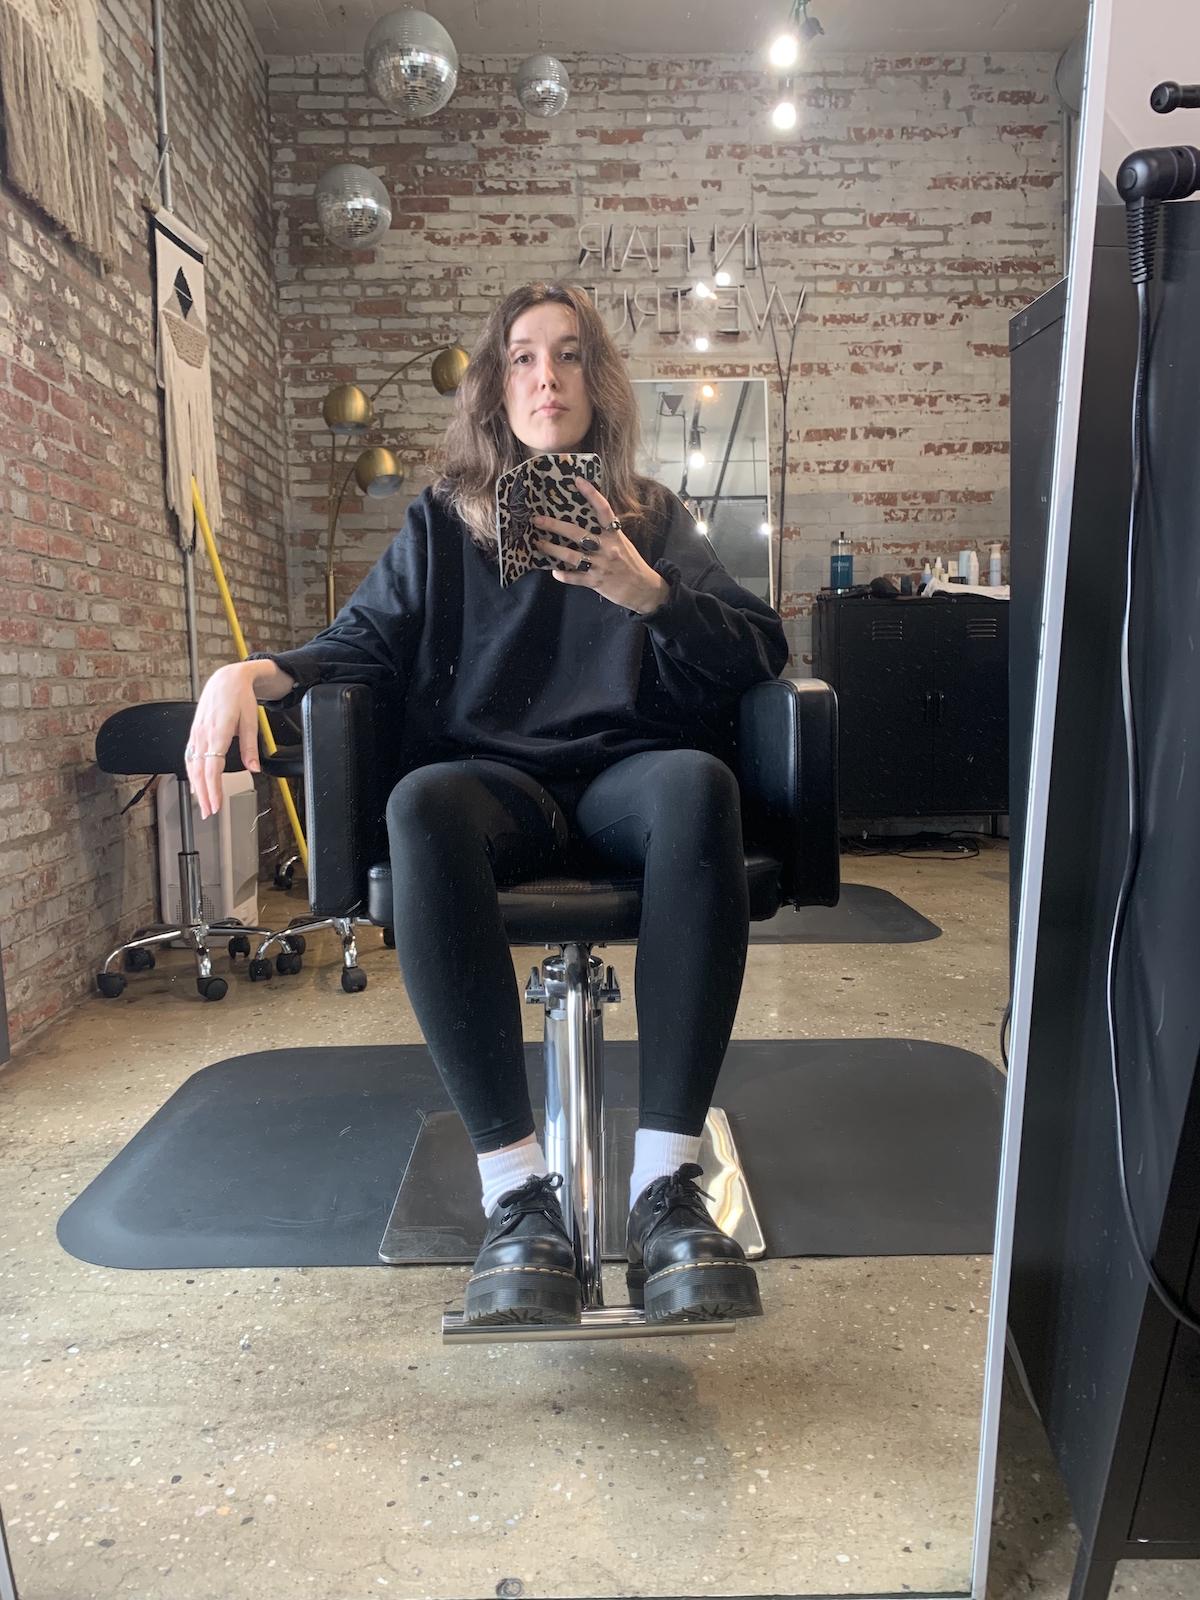 mirror selfie of me in a salon chair with long hair nearly down to my tits